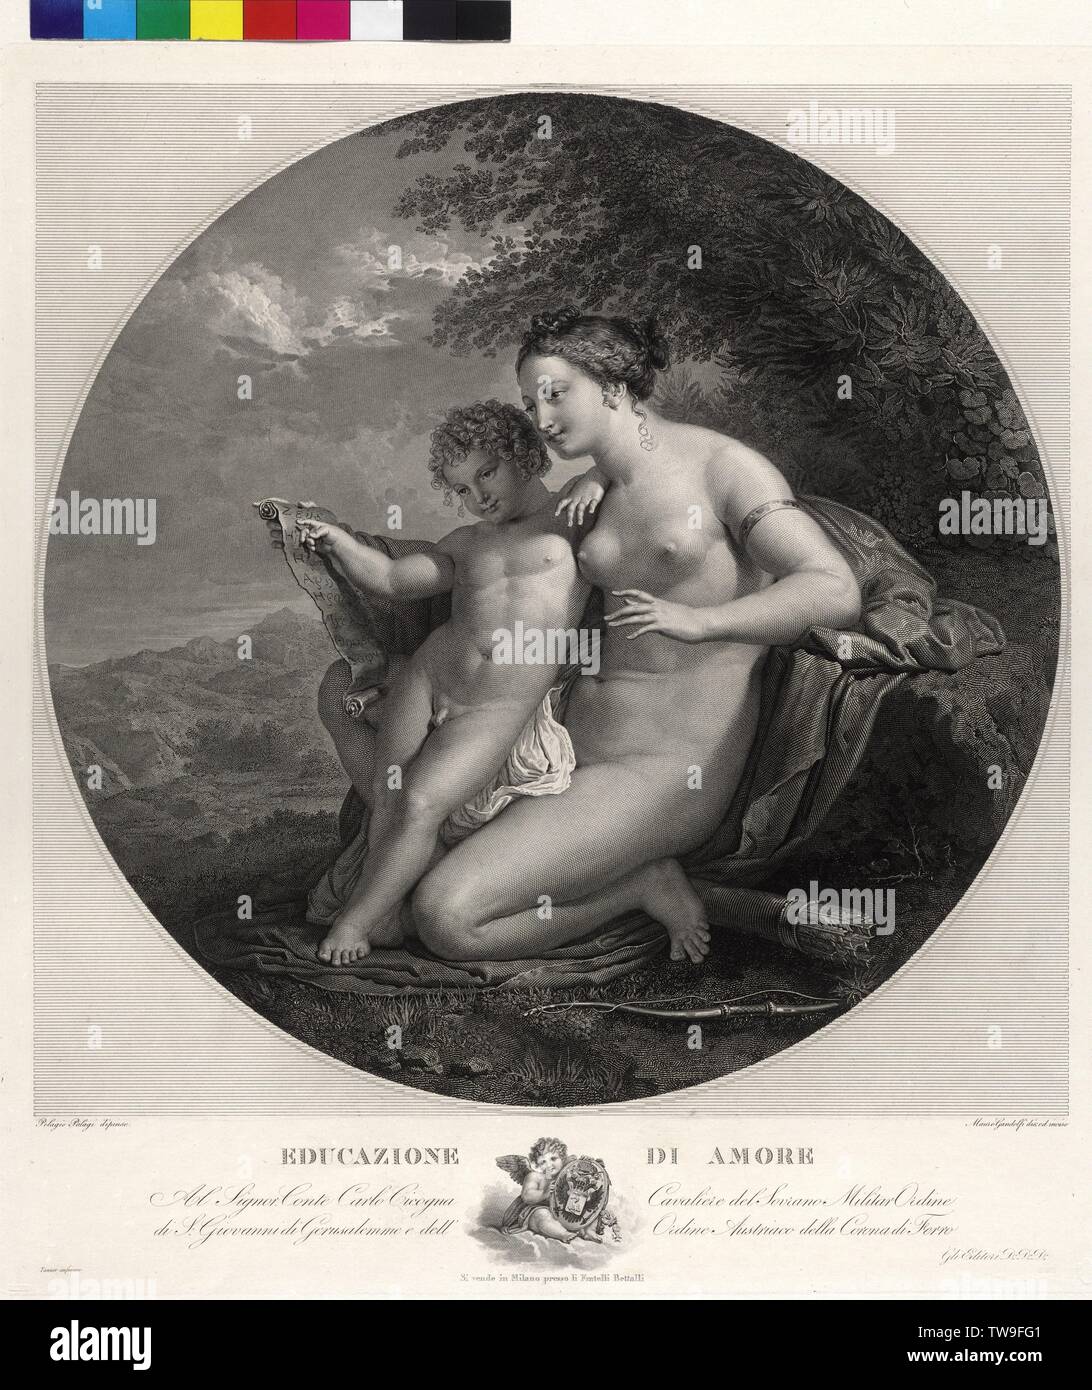 The education of Cupid (Venus as schoolmistress of Cupid), Venus crouching on the ground with Cupid. Venus teaching Cupid the reading, he is pointing on scroll, copper engraving by Mauro Gandolfo based on own drawing, based on painting by Pelagio Palagi dedication at Conte Carlo Cicogna, with coat of arms, Additional-Rights-Clearance-Info-Not-Available Stock Photo